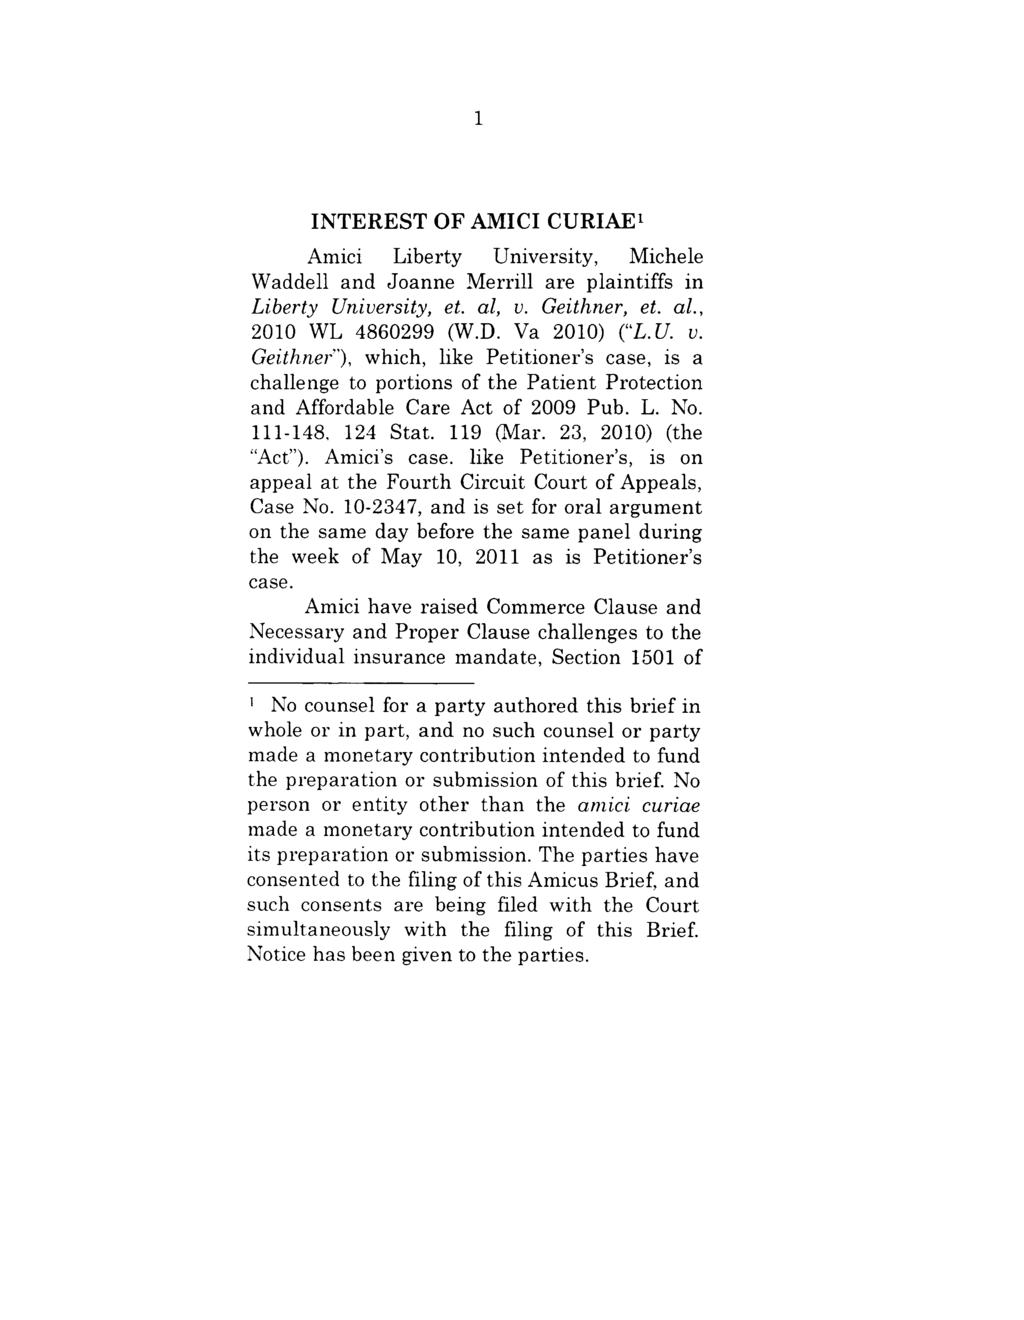 INTEREST OF AMICI CURIAE~ Amici Liberty University, Michele Waddell and Joanne Merrill are plaintiffs in Liberty University, et. al, v. Geithner, et. al., 2010 WL 4860299 (W.D. Va 2010) ("L.U.v. Geithner ), which, like Petitioner s case, is a challenge to portions of the Patient Protection and Affordable Care Act of 2009 Pub.